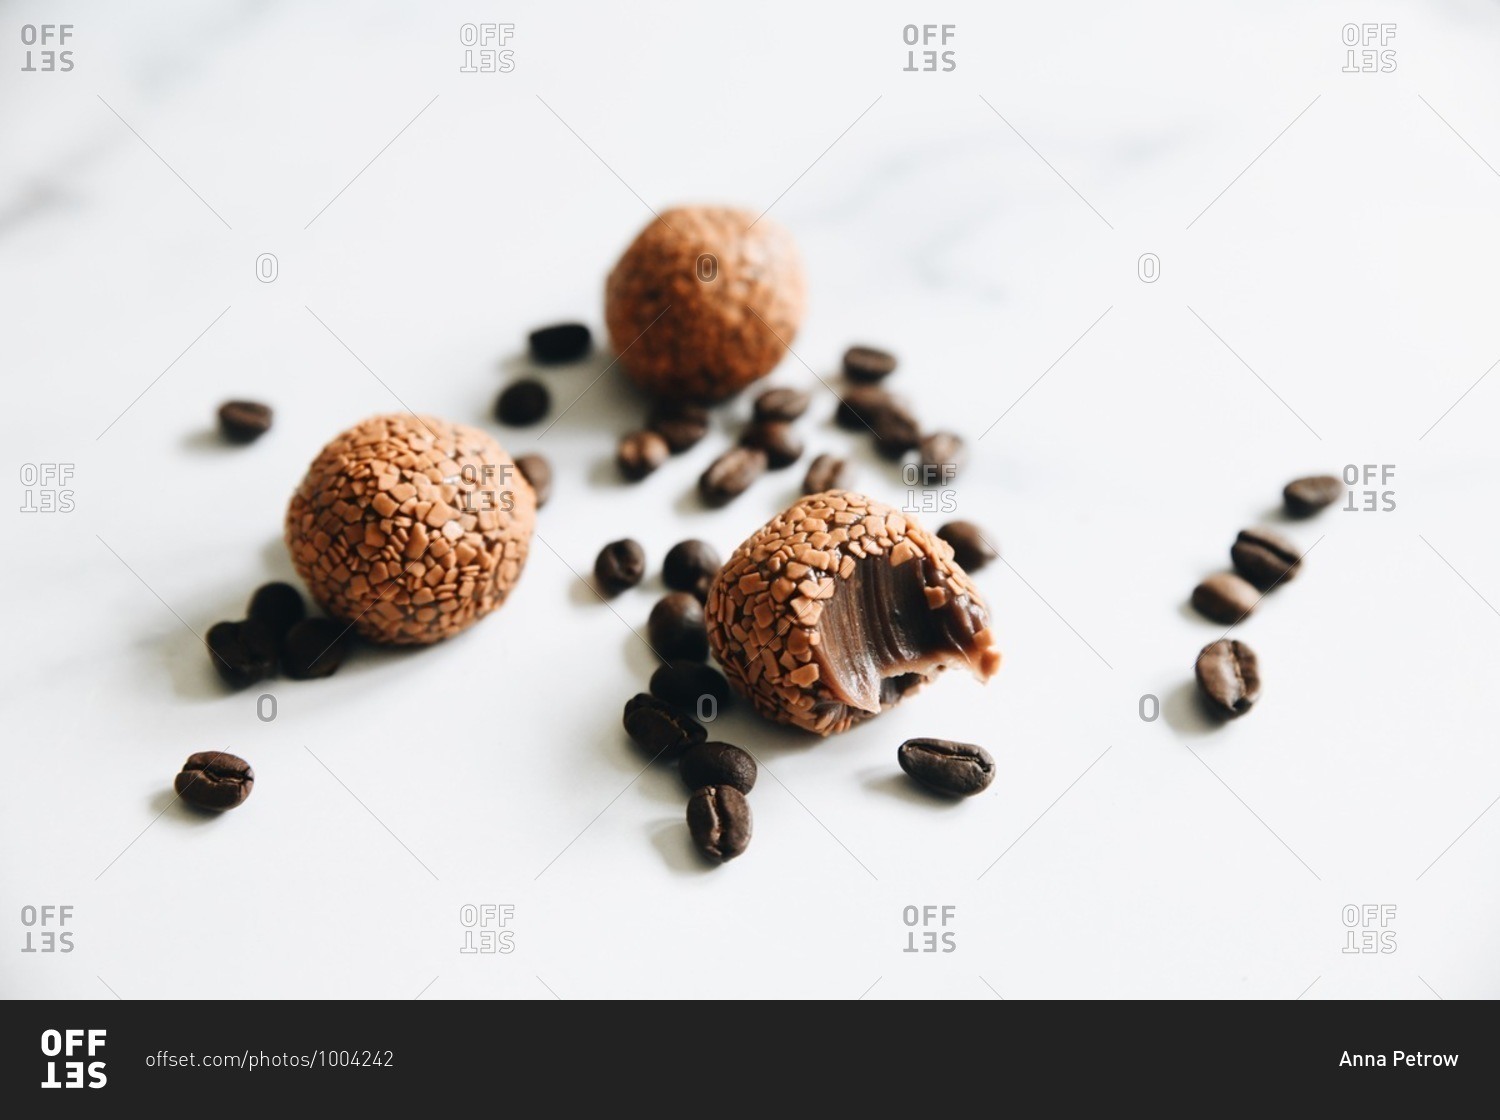 Cappuccino brigadeiros missing a bite on white surface with coffee beans